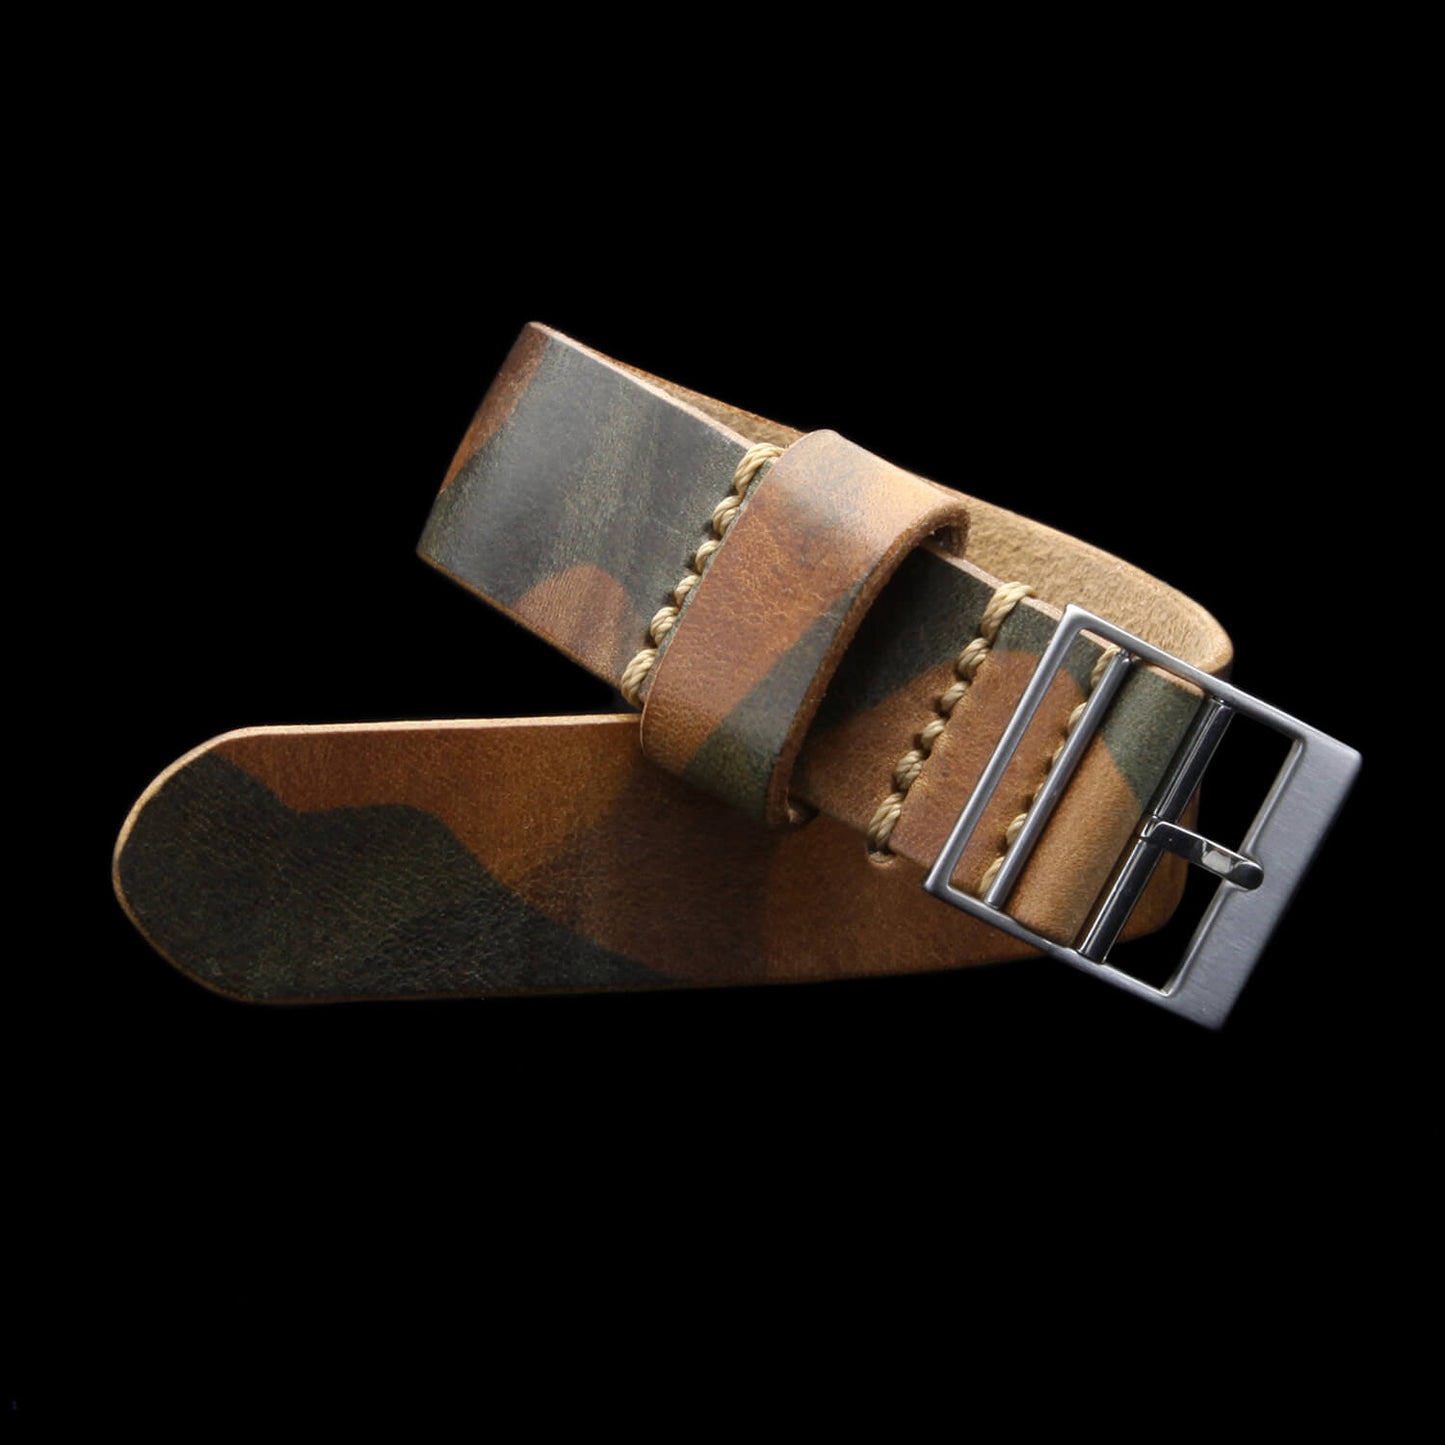 Leather Watch Strap, Classic RAF II Military 101 | Ladder Buckle | Full Grain Italian Vegetable-Tanned Leather | Cozy Handmade